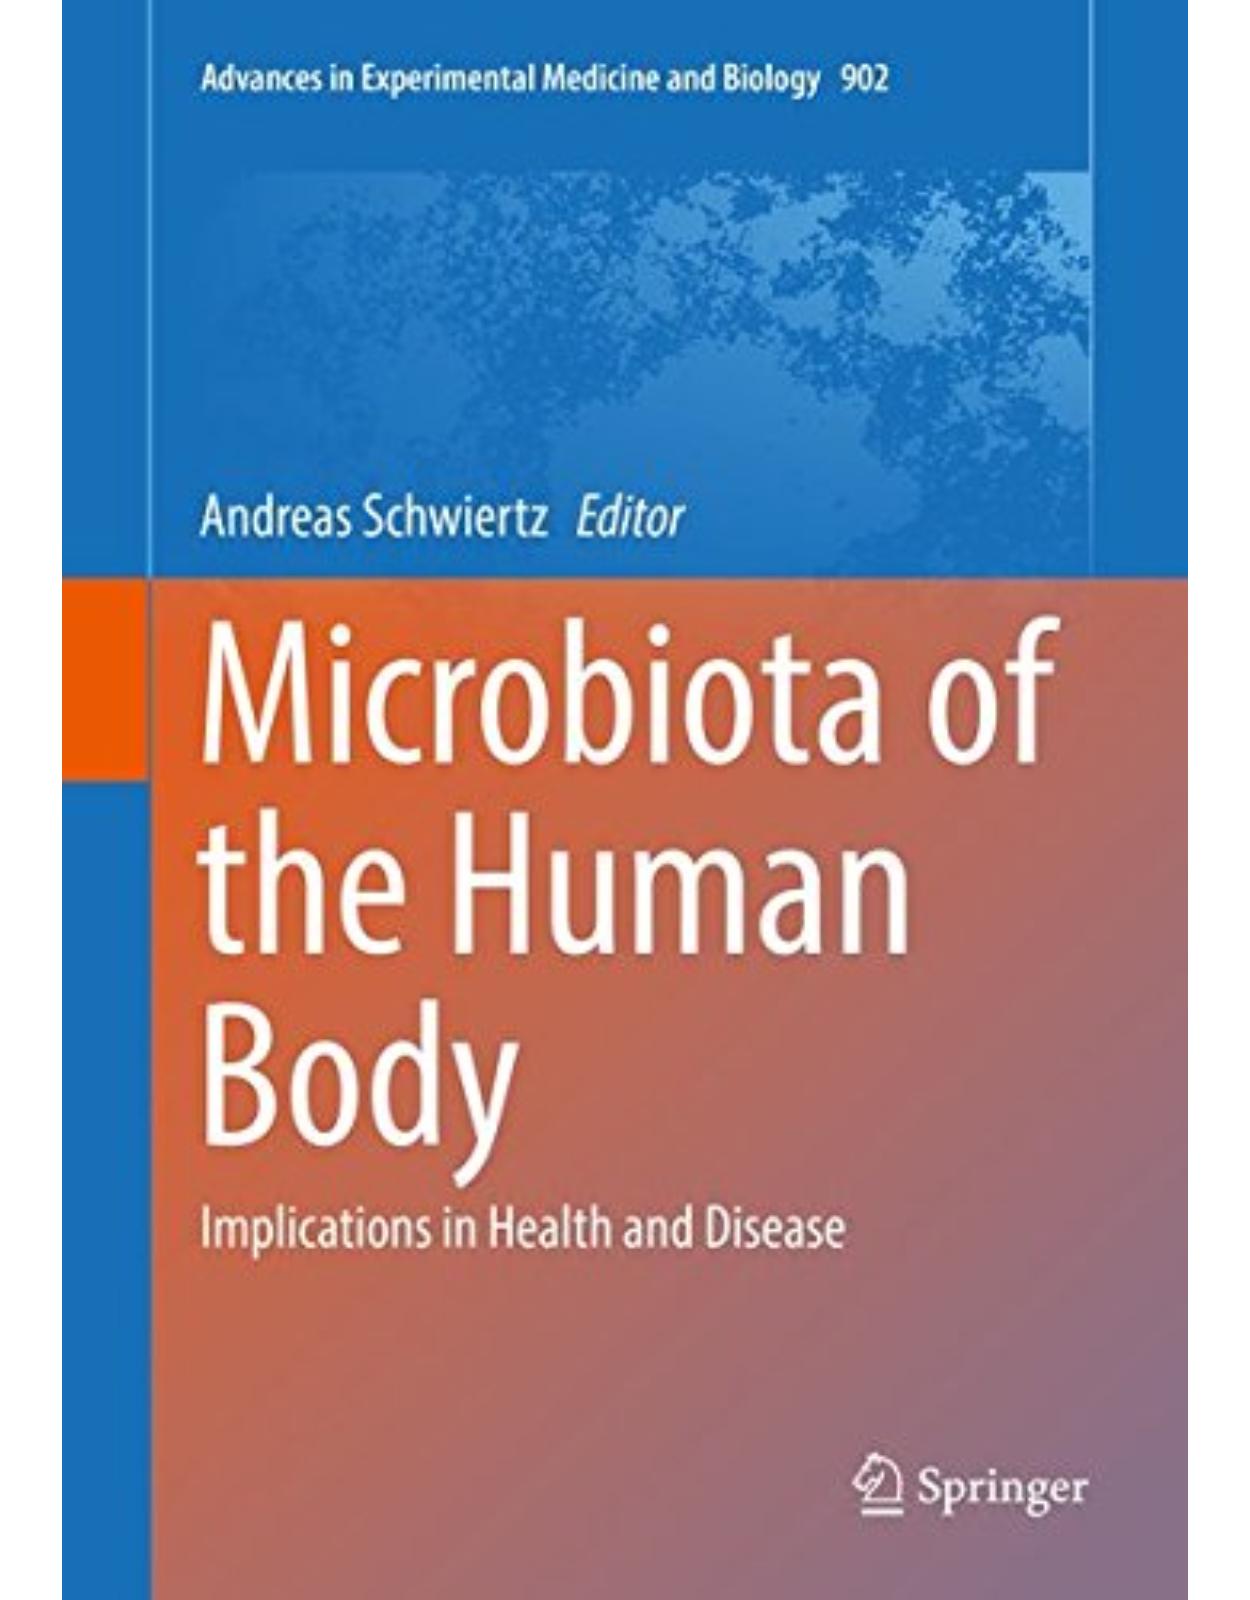 Microbiota of the Human Body: Implications in Health and Disease